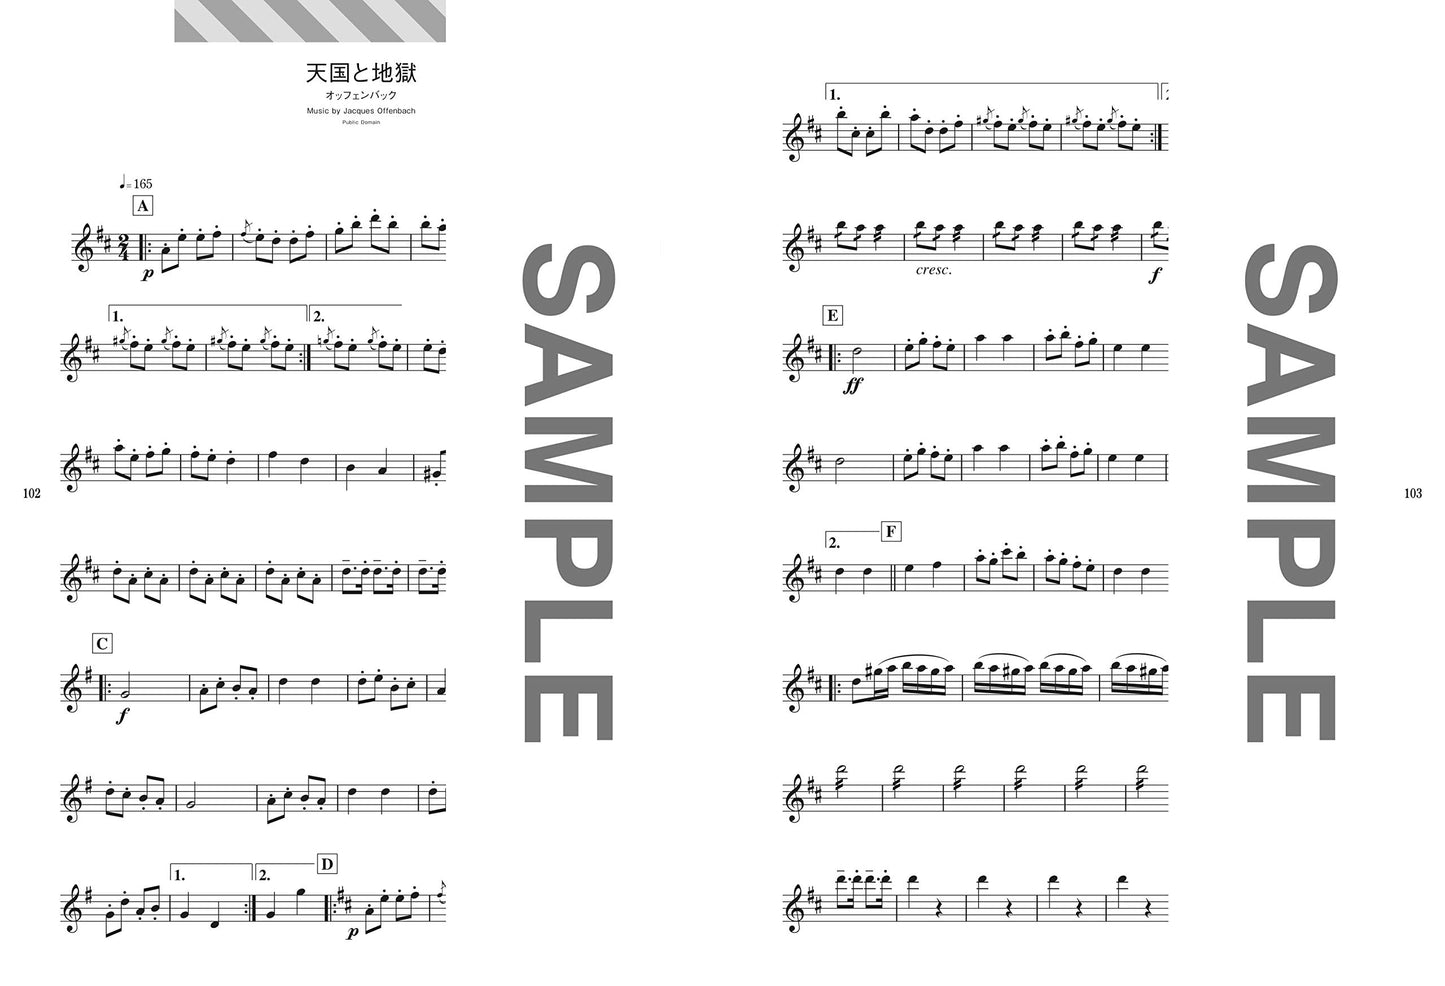 Popular Collection Flute for Teenagers(Upper-Intermediate) Sheet Music Book